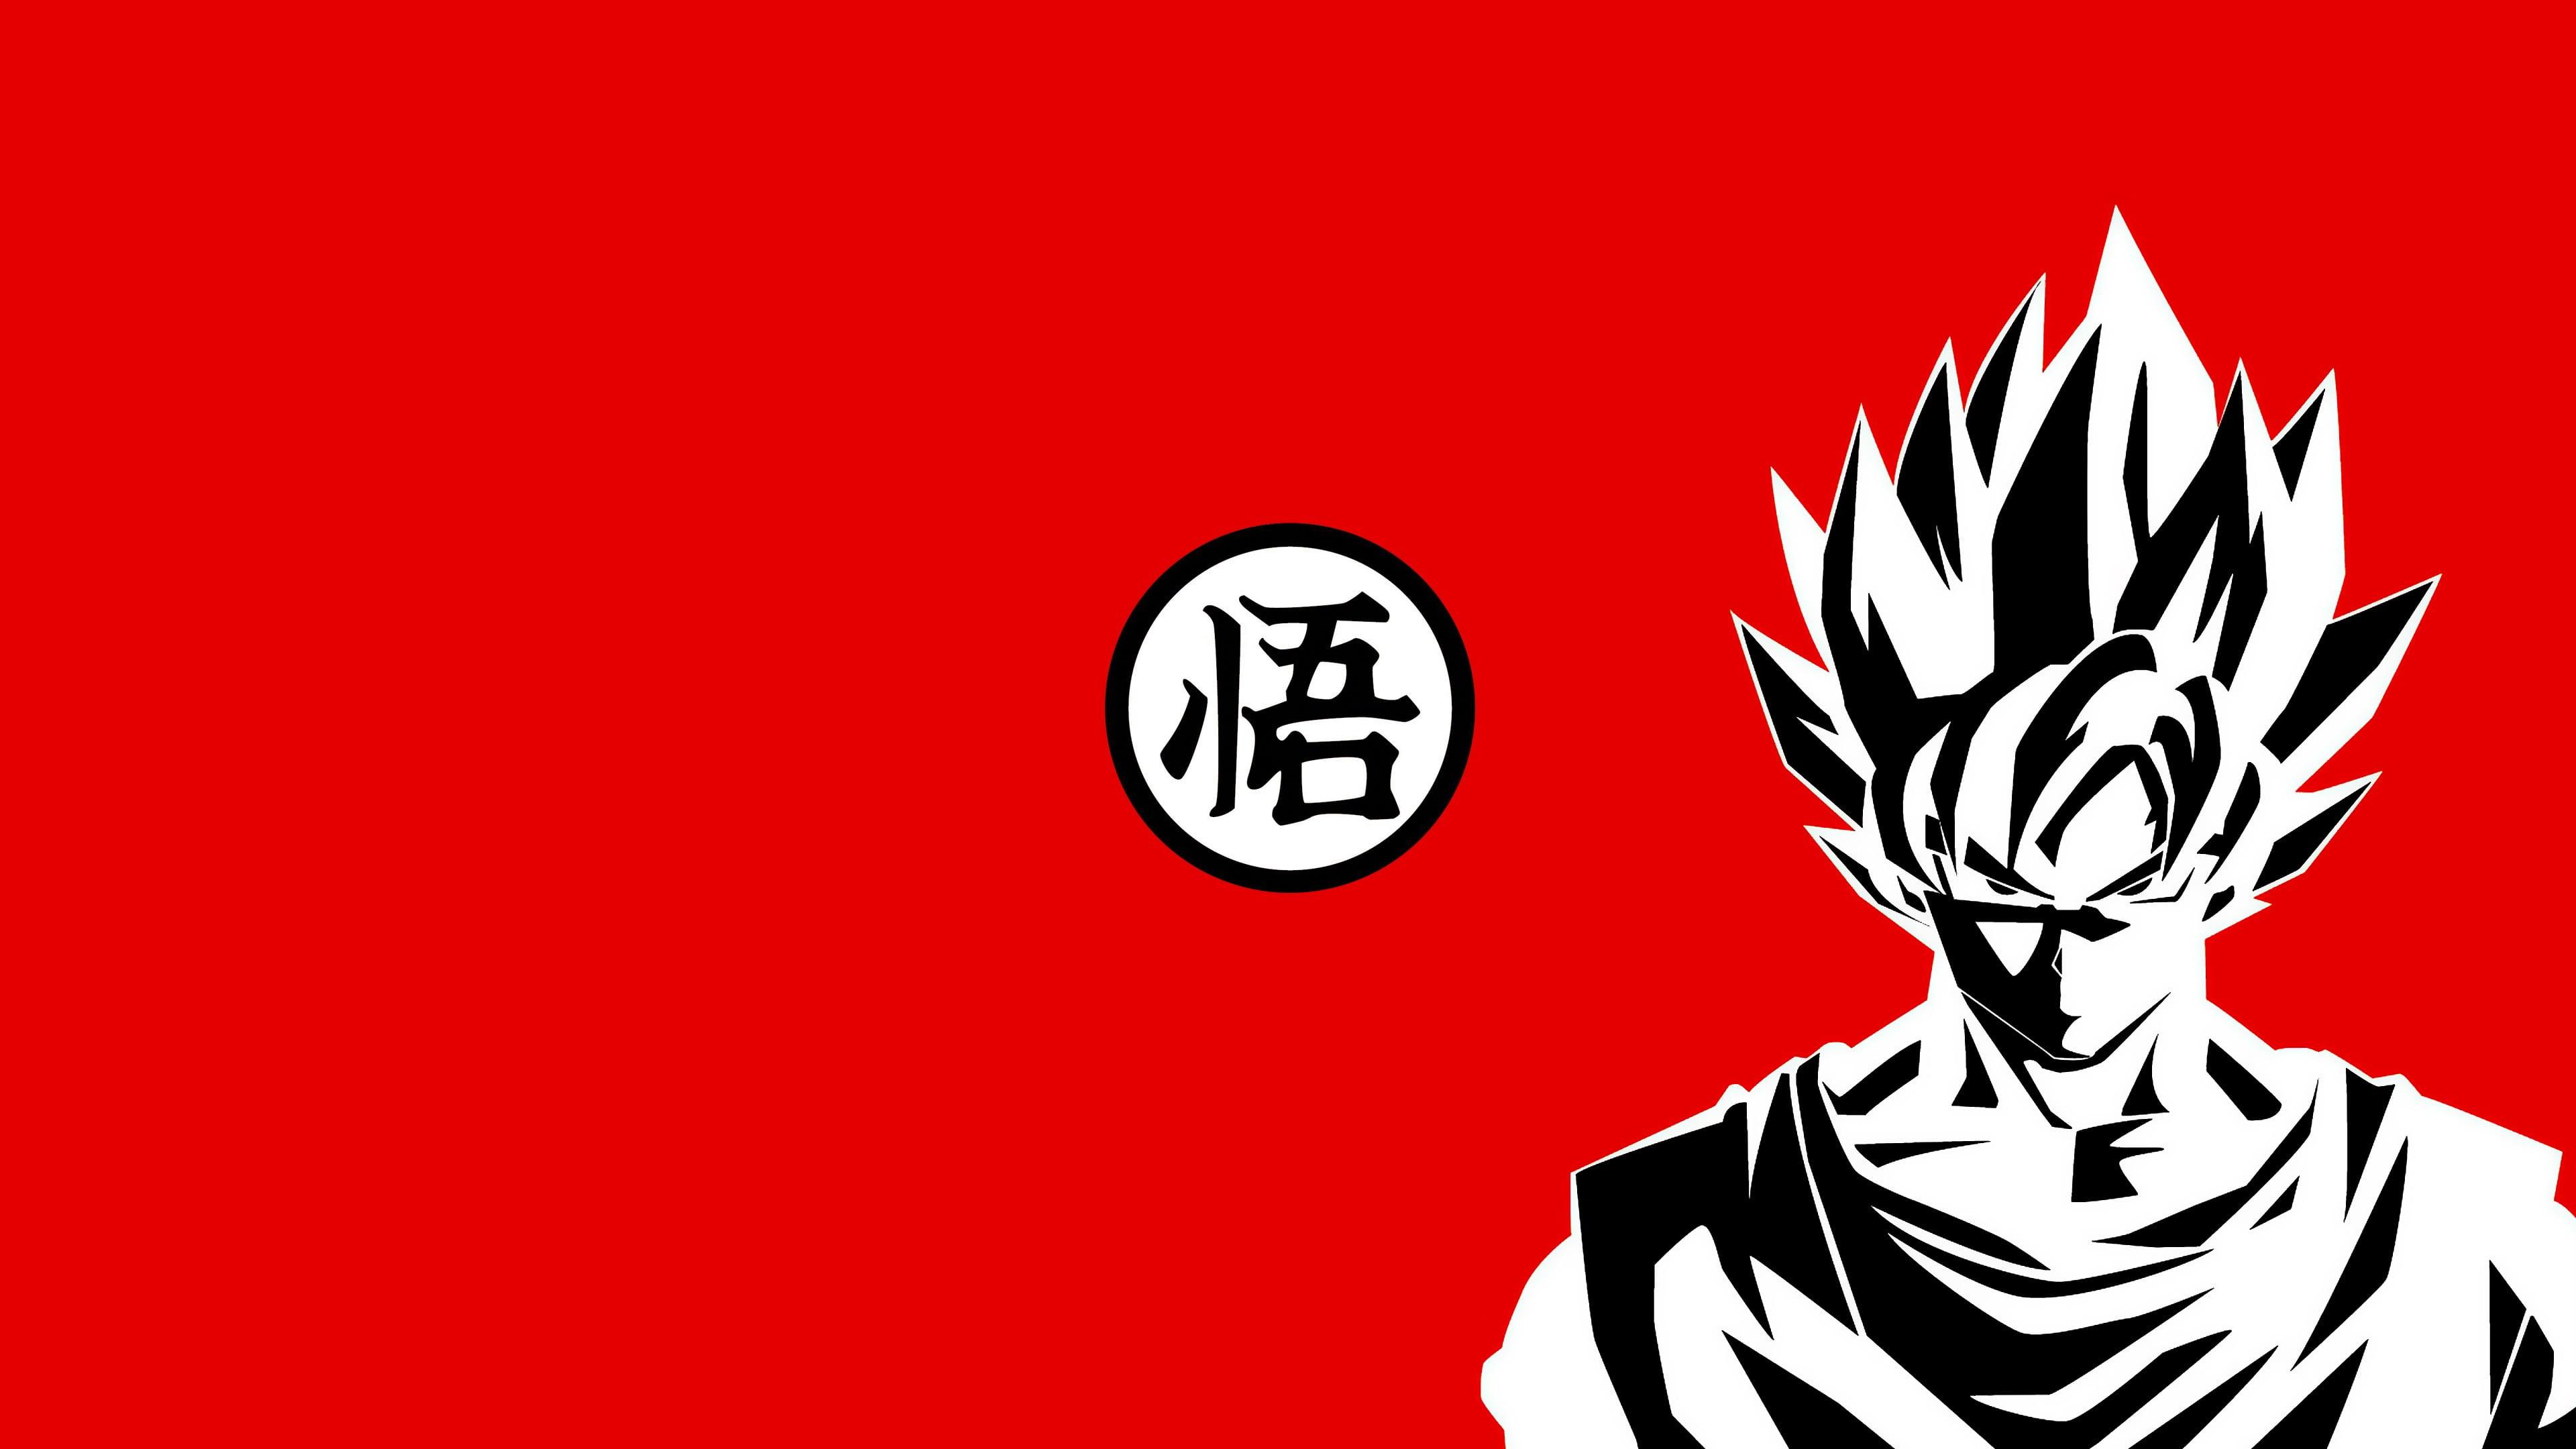 Goku HD Wallpaper For Android